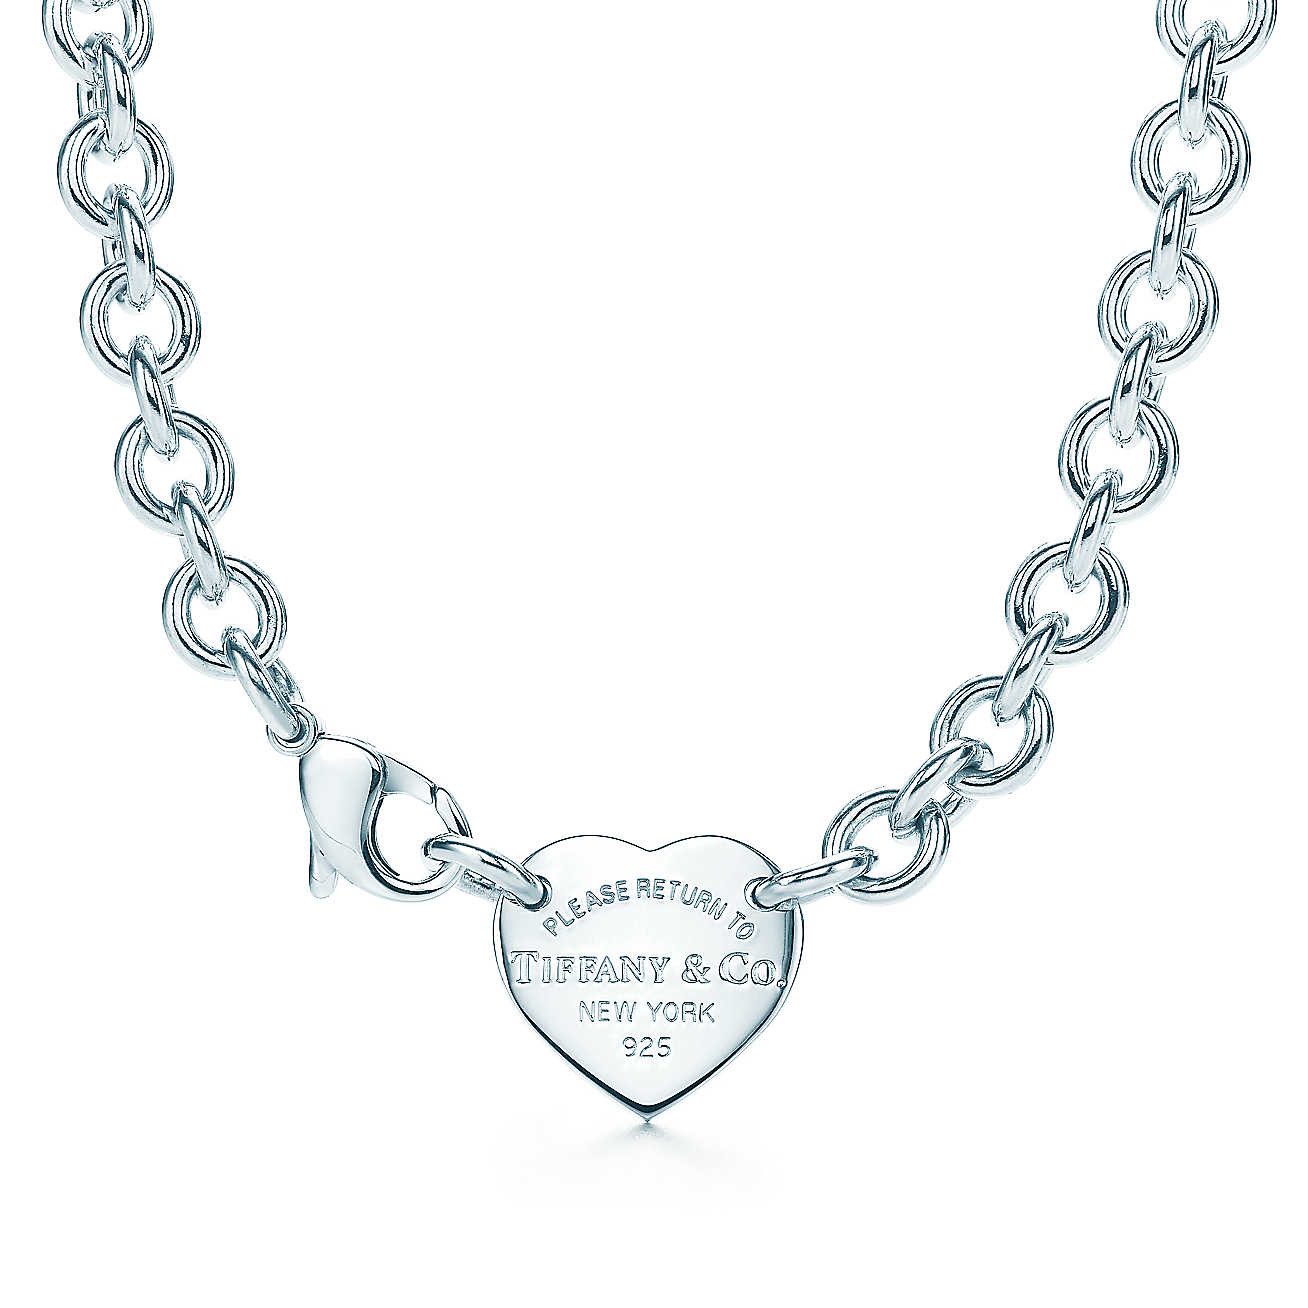 Tiffany Necklace Heart
 Return to Tiffany heart tag choker in sterling silver